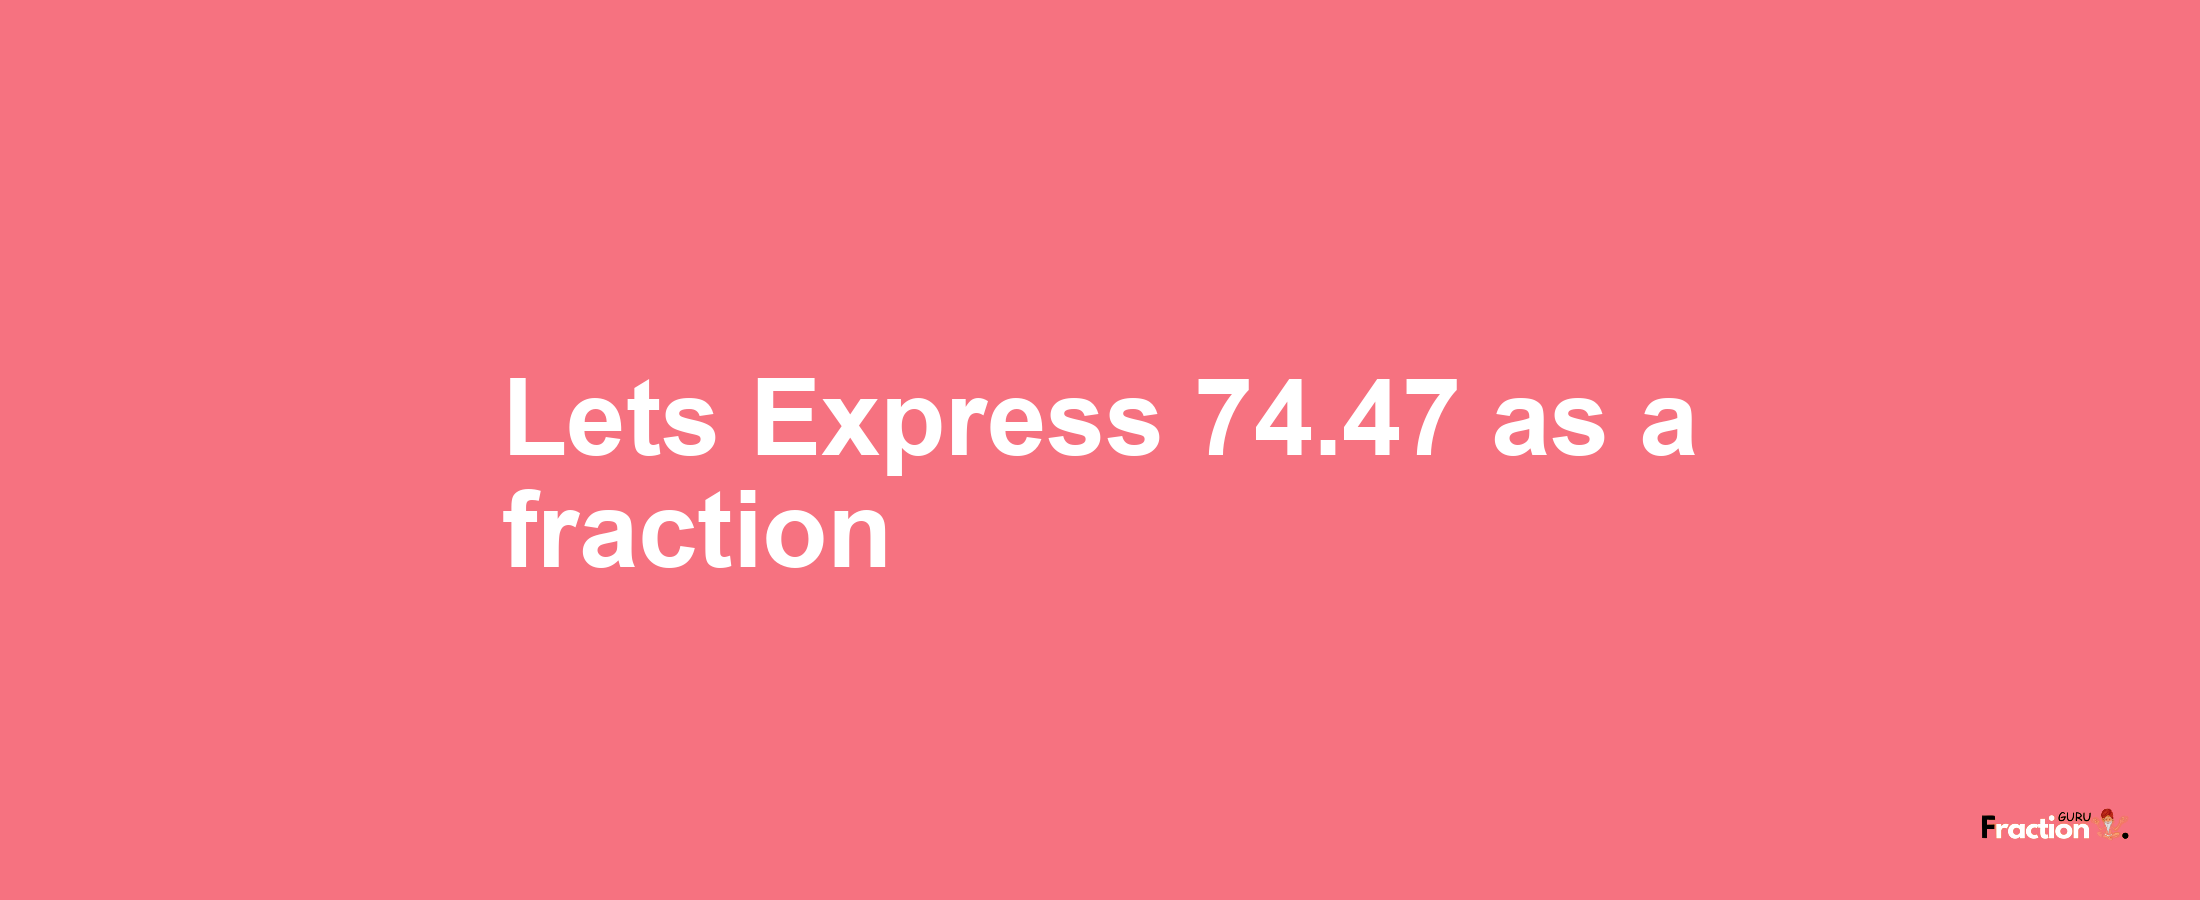 Lets Express 74.47 as afraction